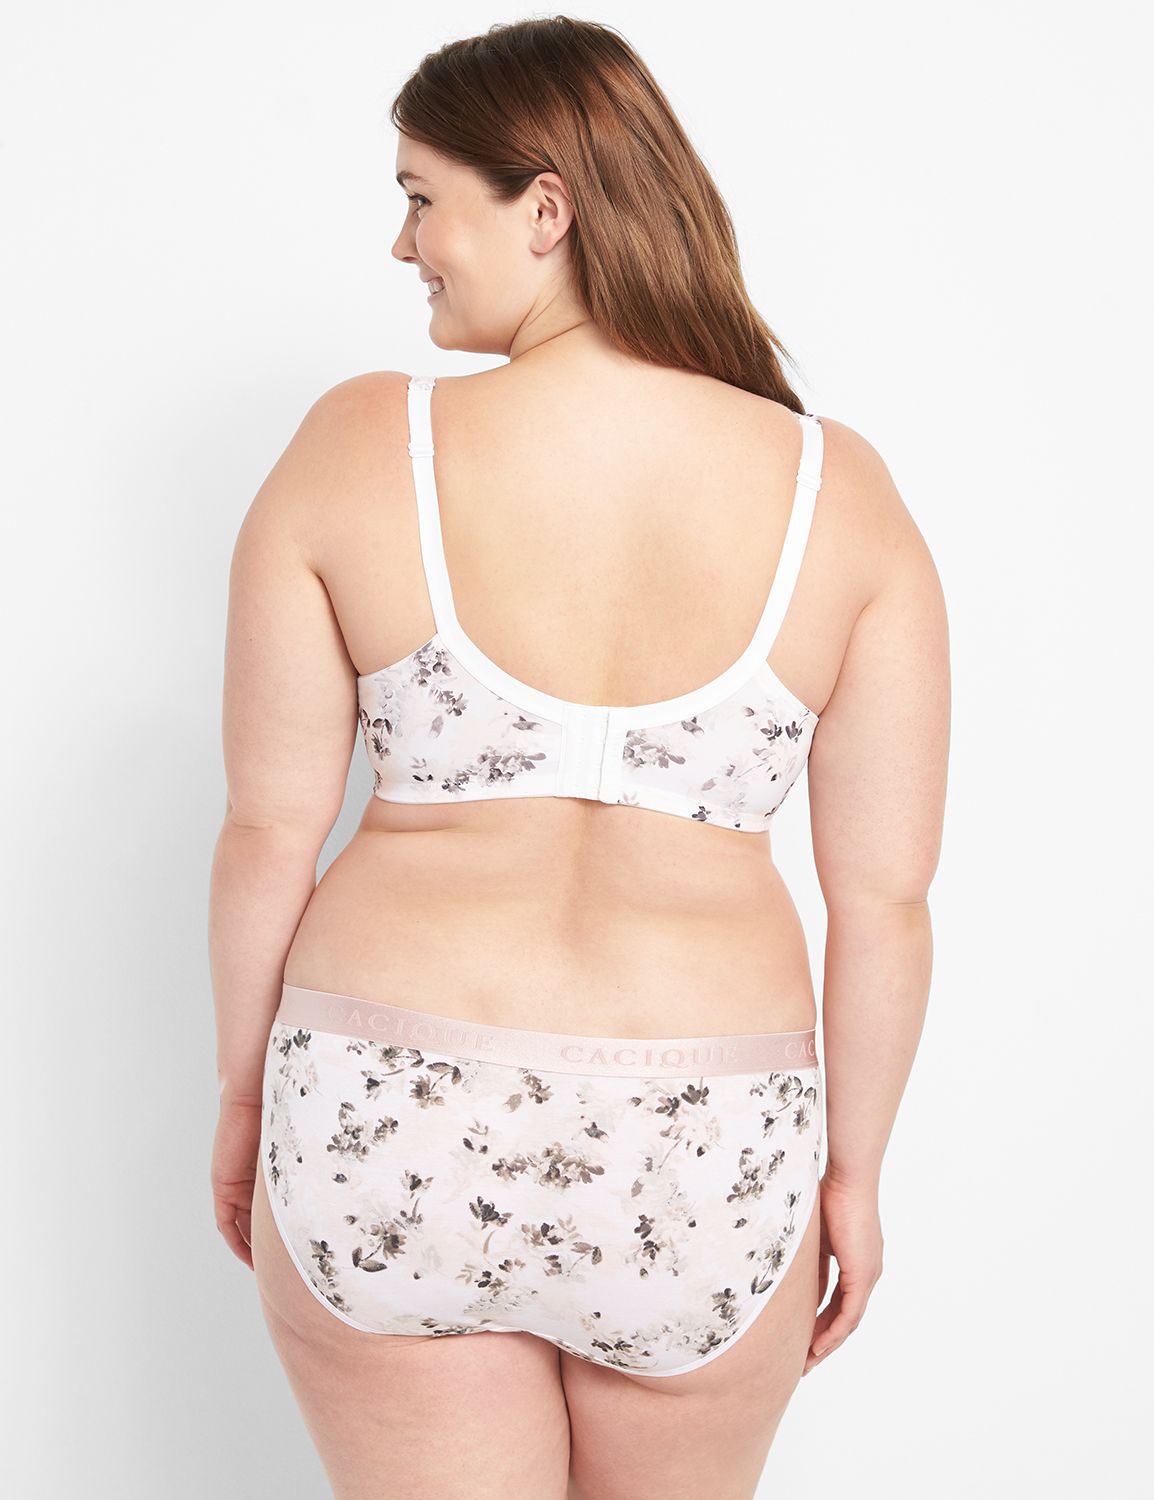 Lane Bryant - Things to be excited about: 1. It's Saturday. 2. The  Semi-Annual Sale is on. 3. You can search bras by size online now!